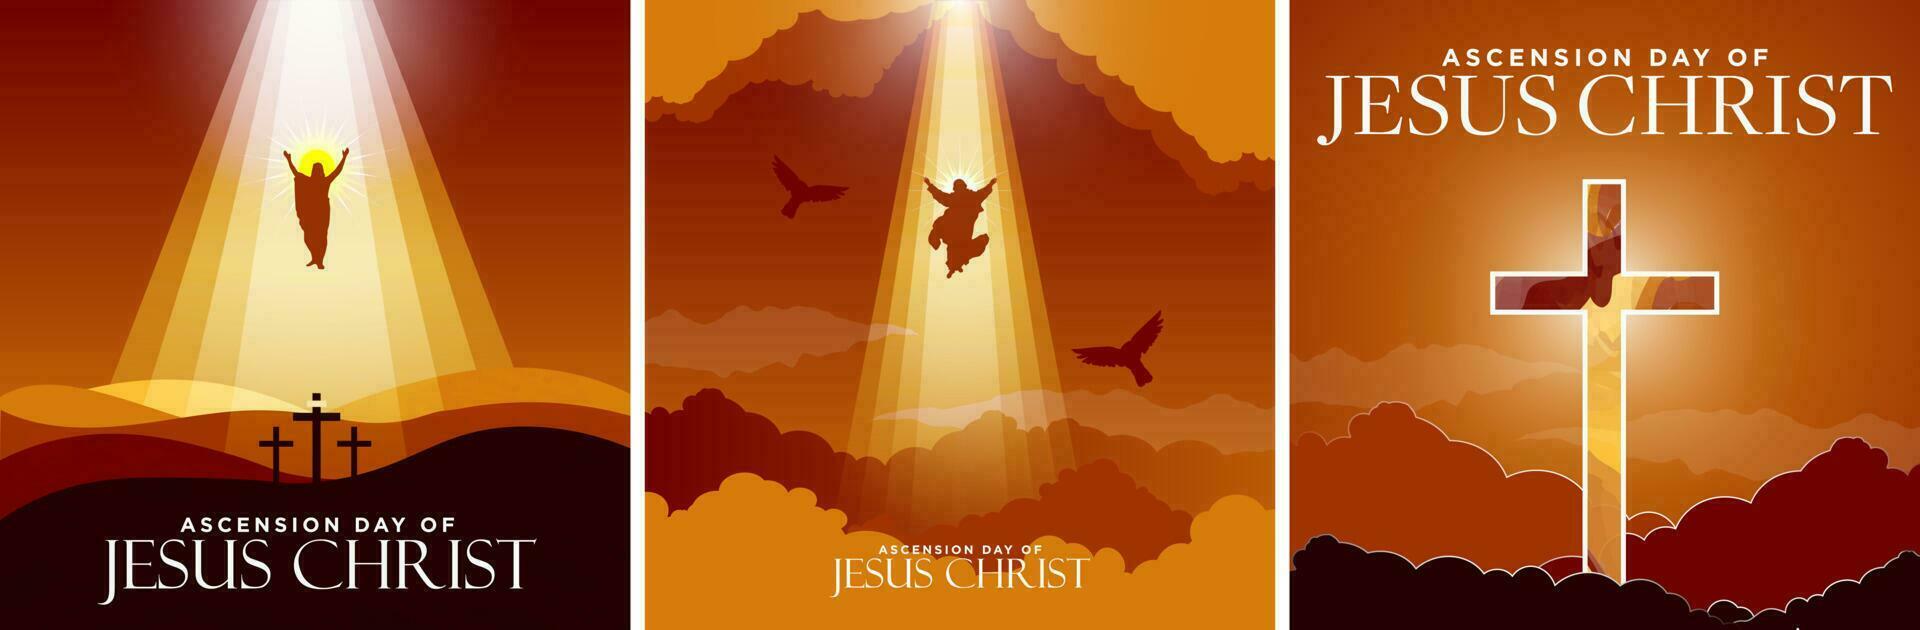 Ascension day of Jesus Christ Sunset Posters vector